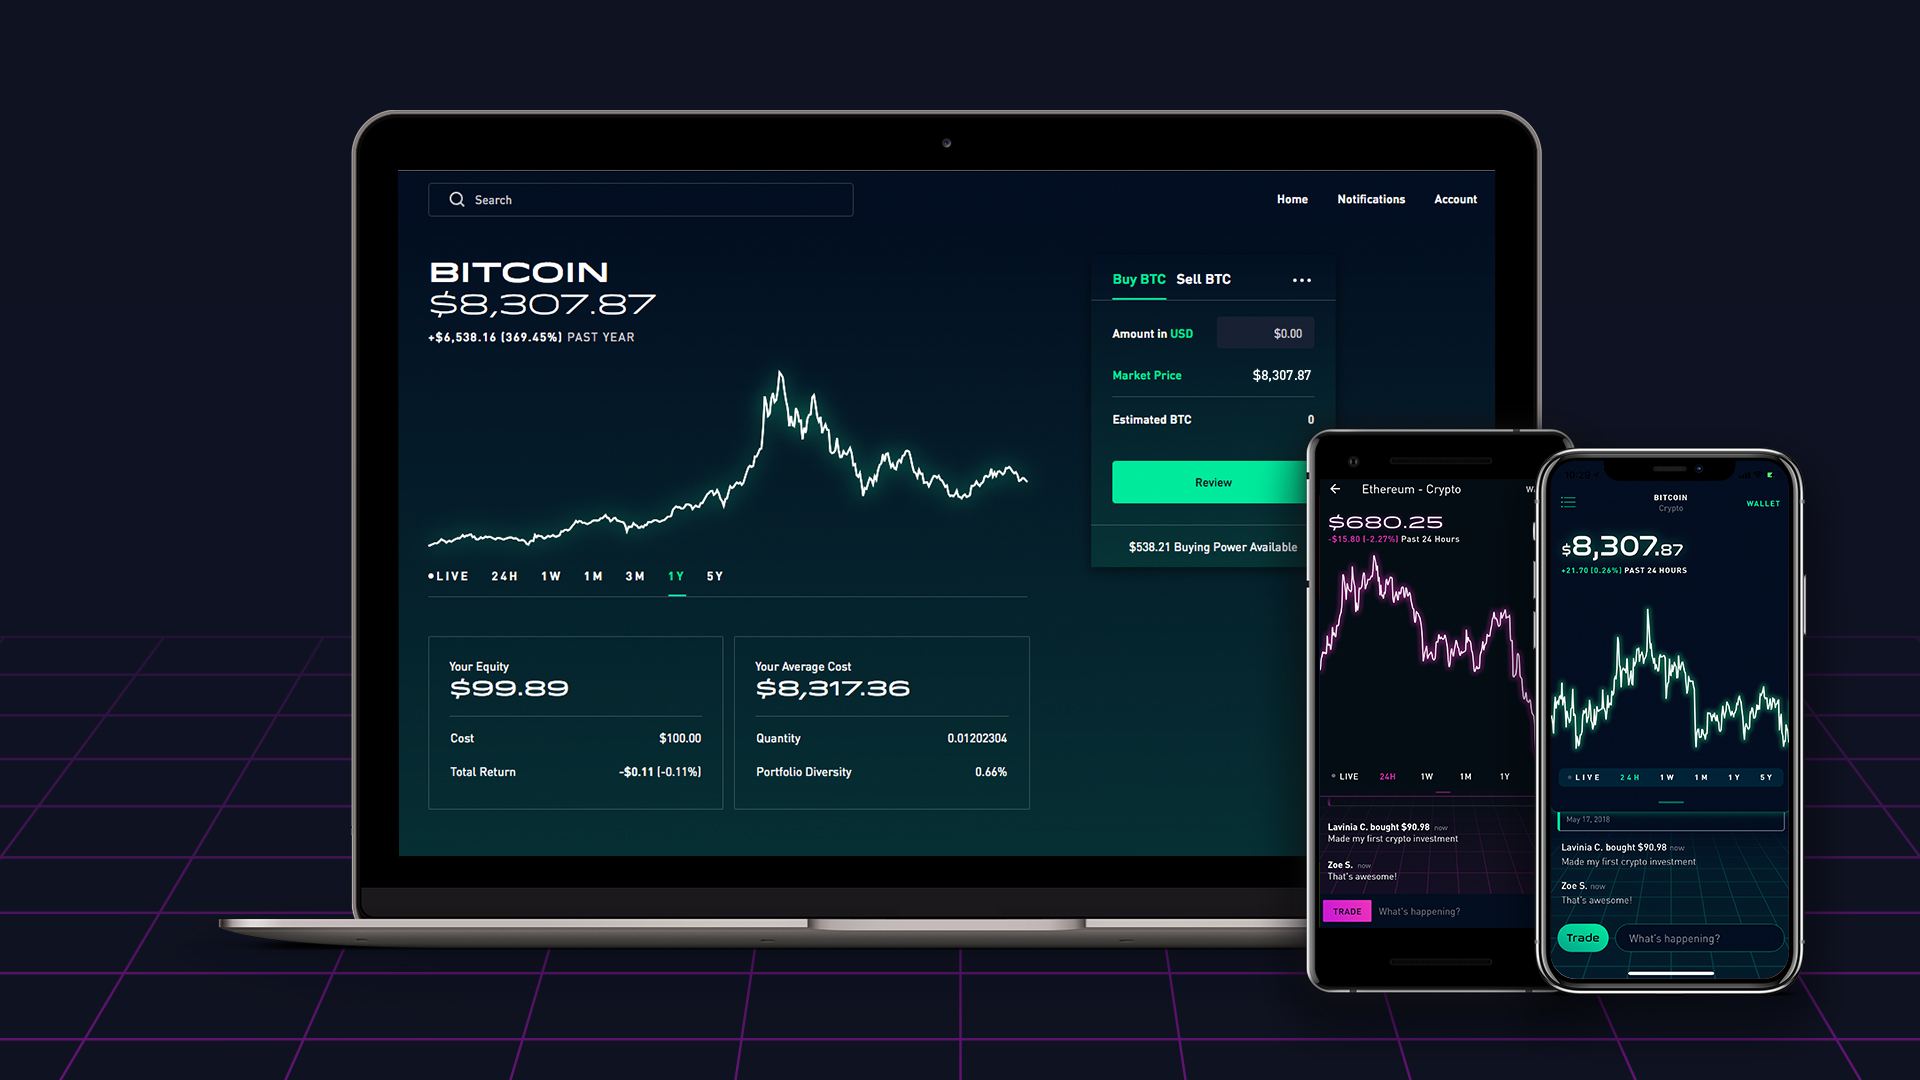 Trading app Robinhood is stealthily recruiting ahead of planned UK launch |  TechCrunch